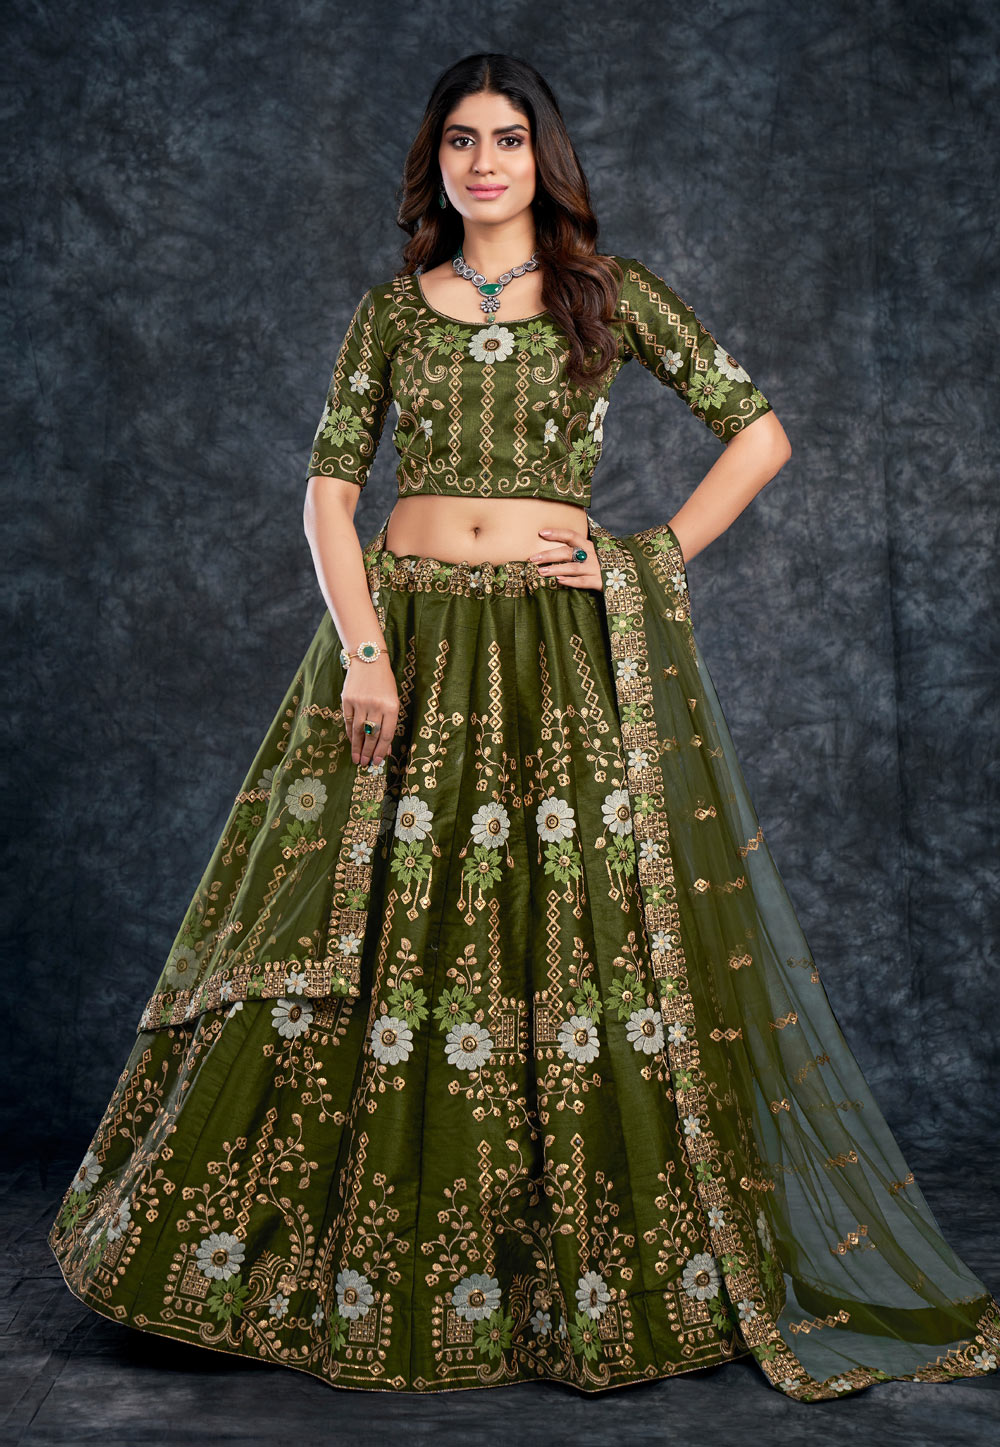 2021 Best Lehenga Color Combination for Brides and Bridesmaids